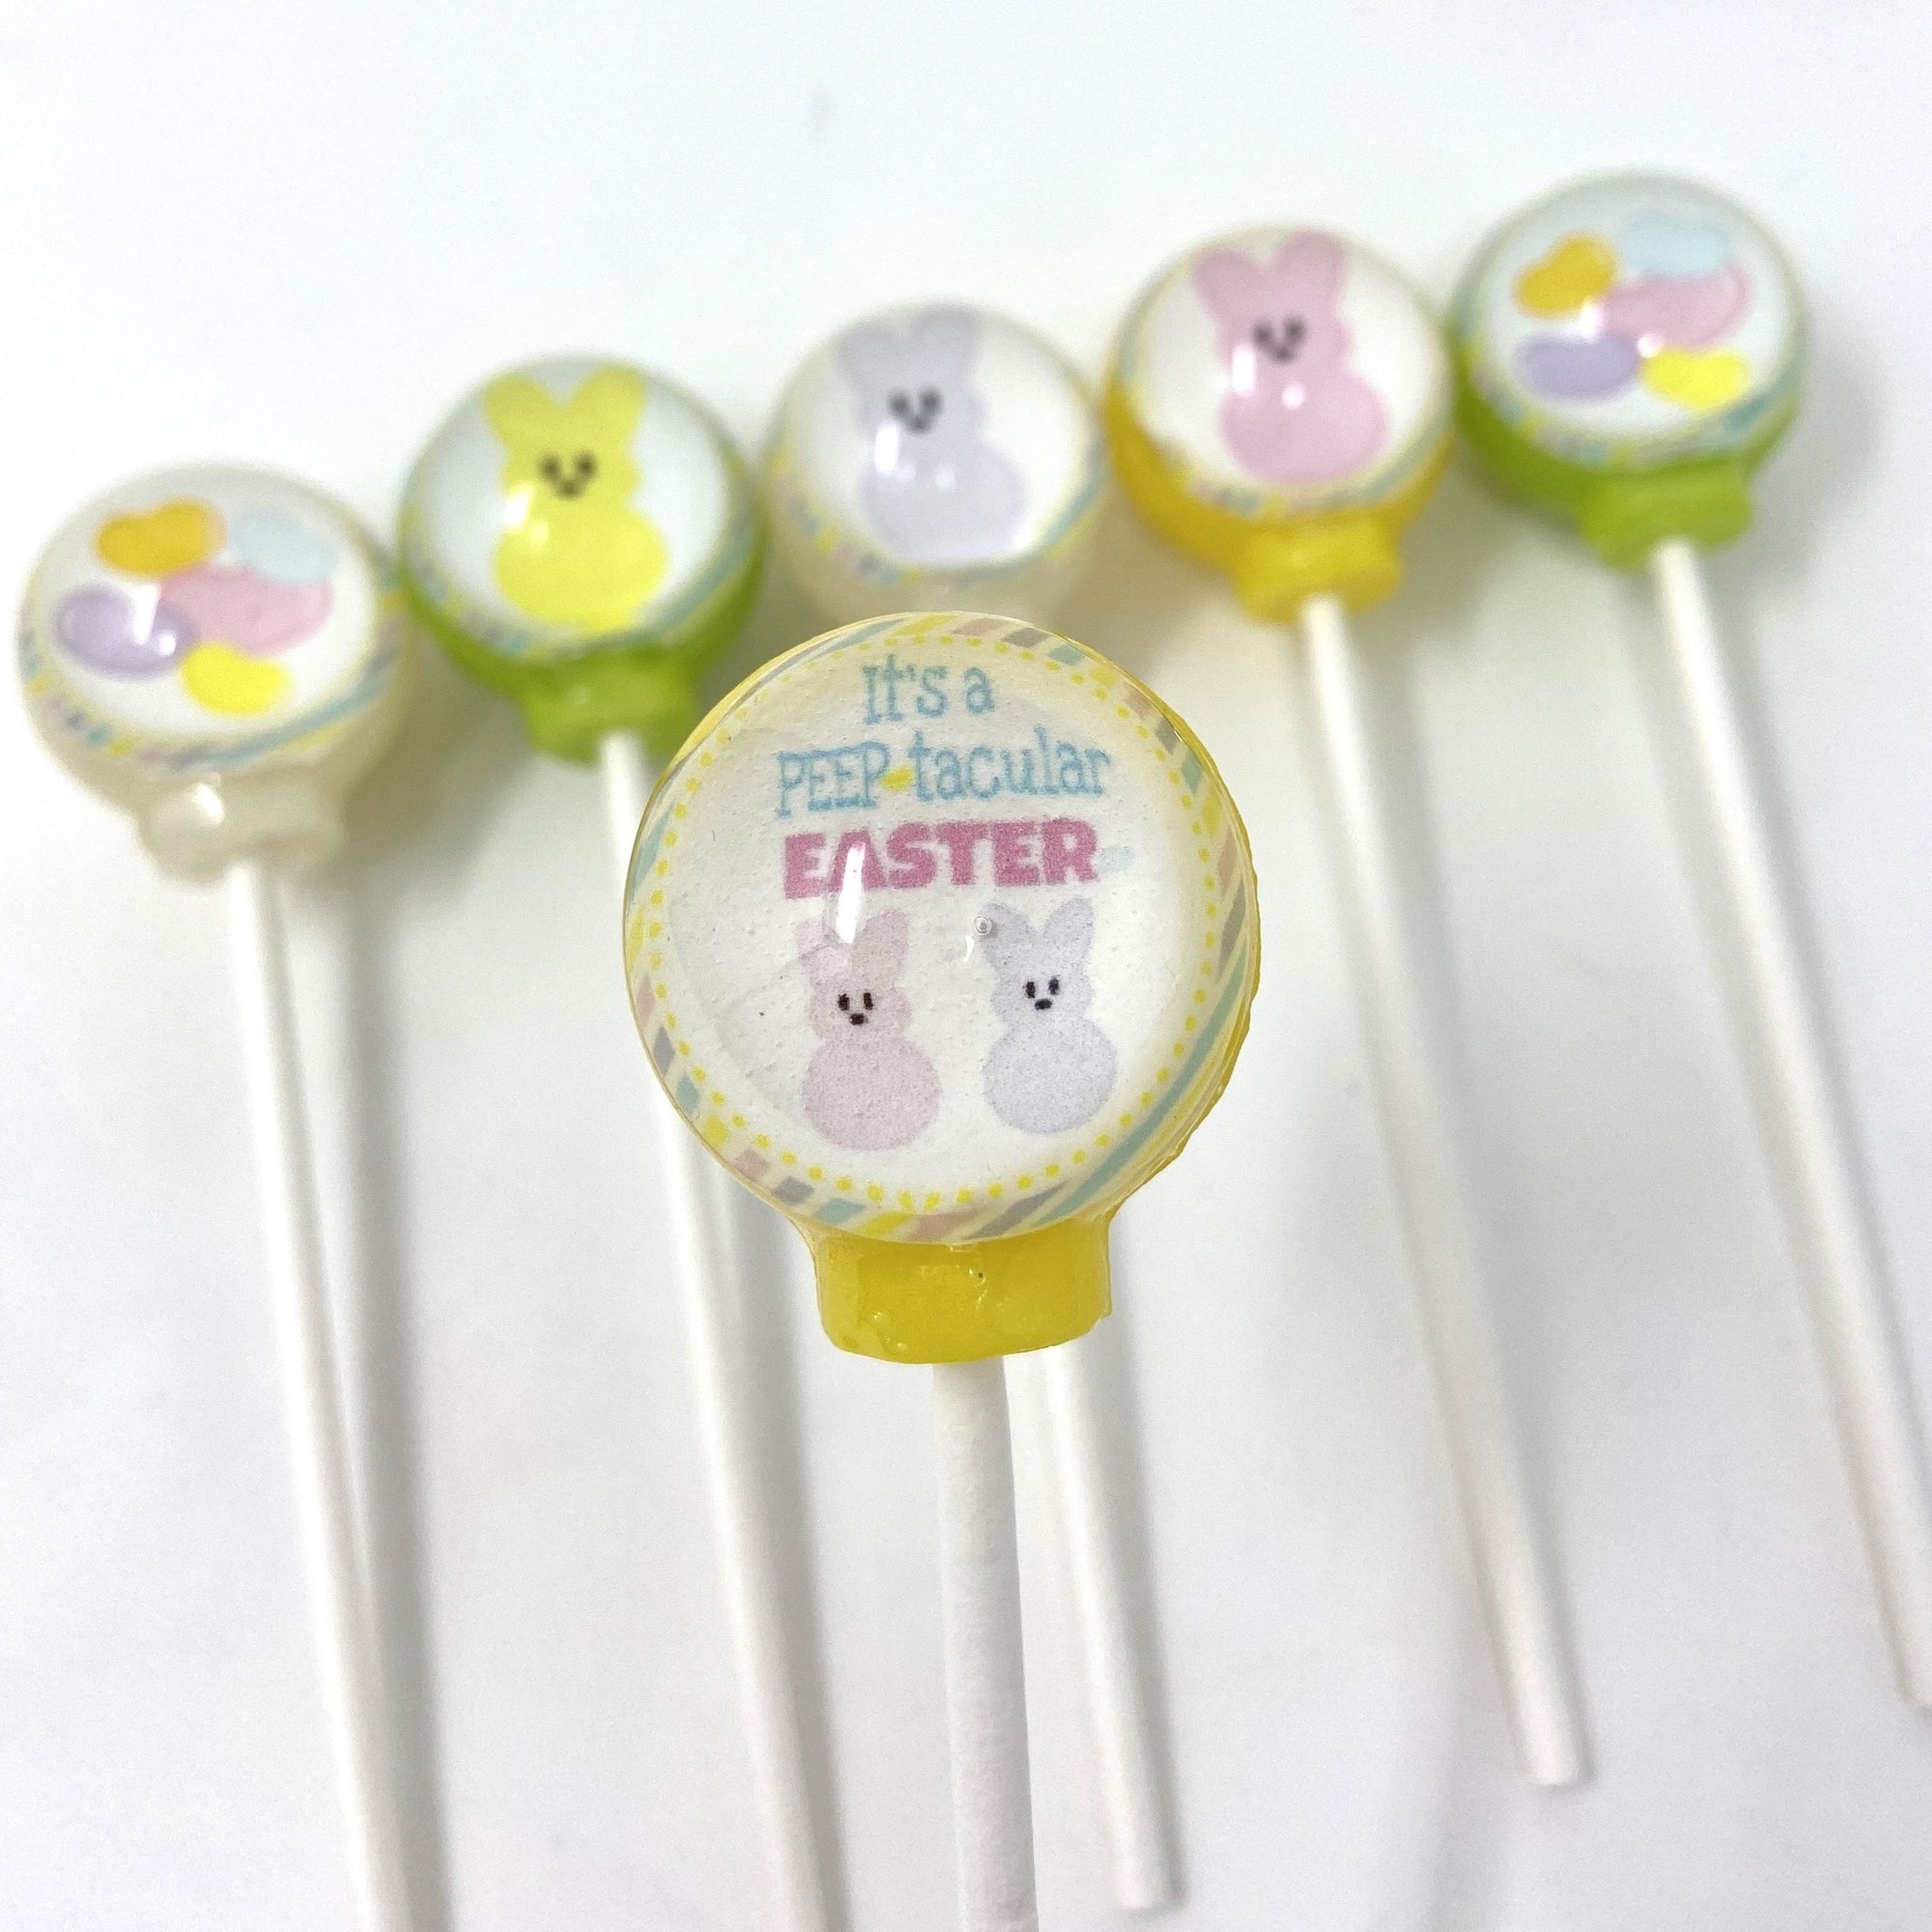 Peep Lollipops 6-piece set by I Want Candy!